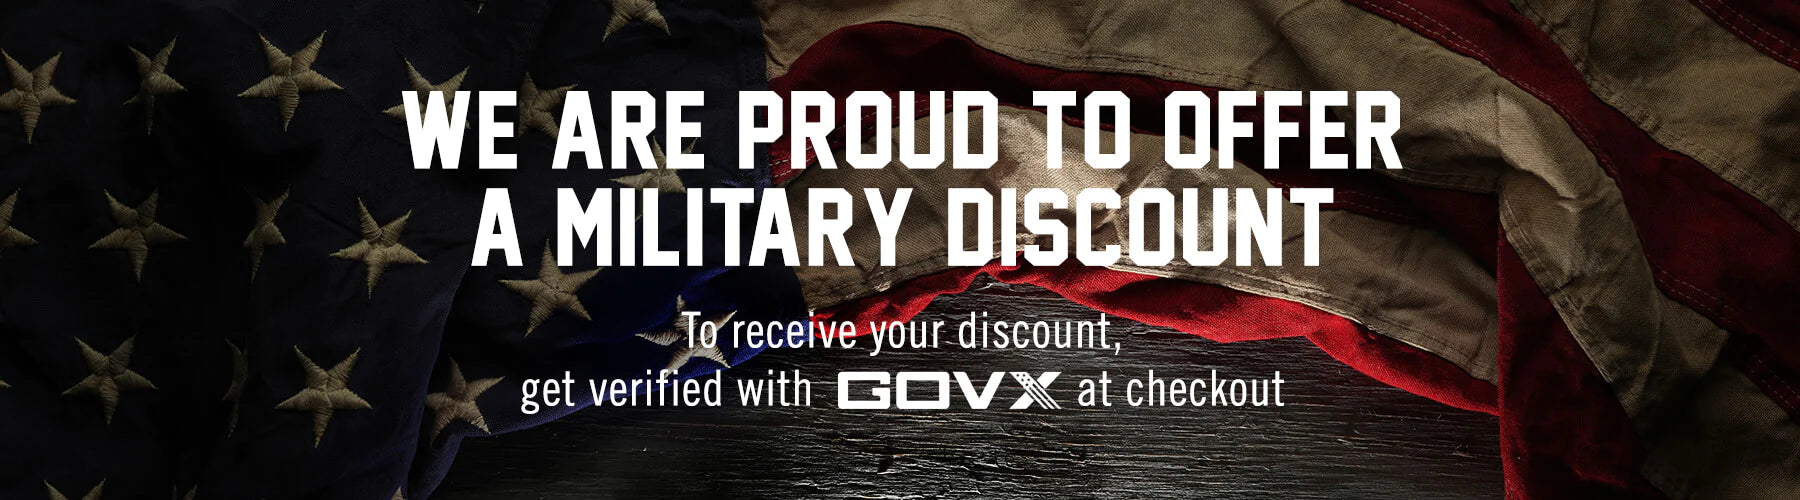 Barberry Coast Now Offering Military Discounts to Show Appreciation for Those Who Serve